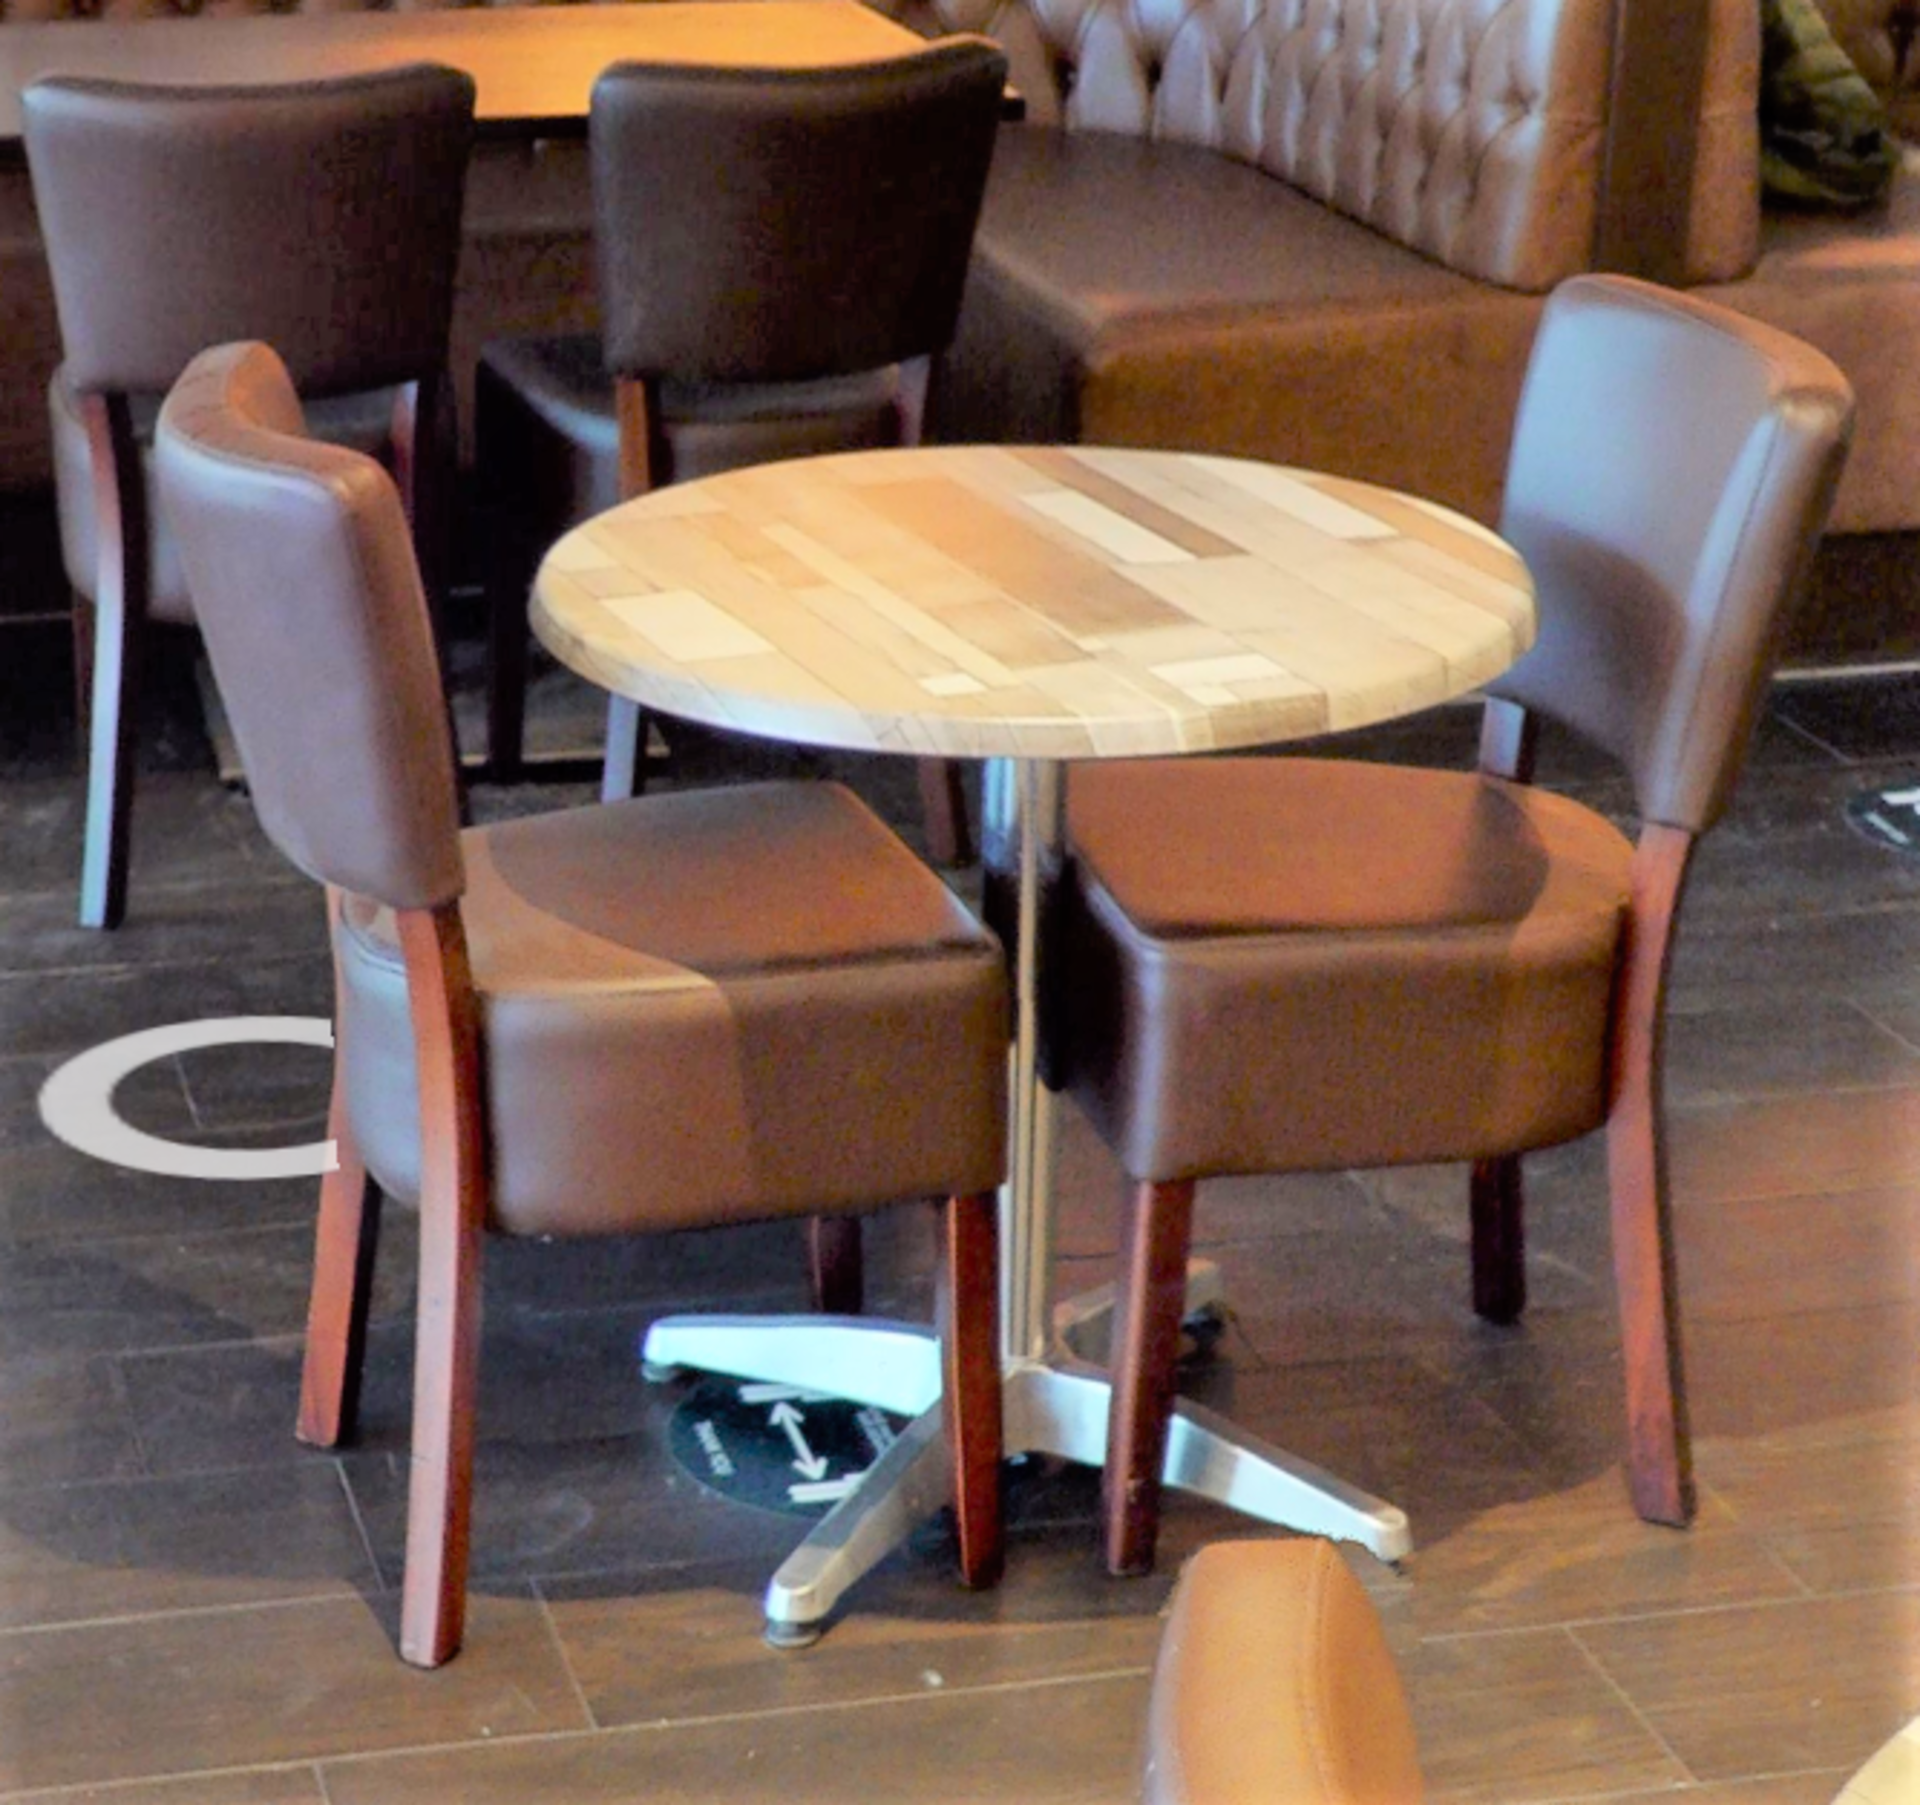 6 x Restaurant Chairs With Brown Leather Seat Pads and Padded Backrests - CL701 - Location: Ashton - Image 5 of 9